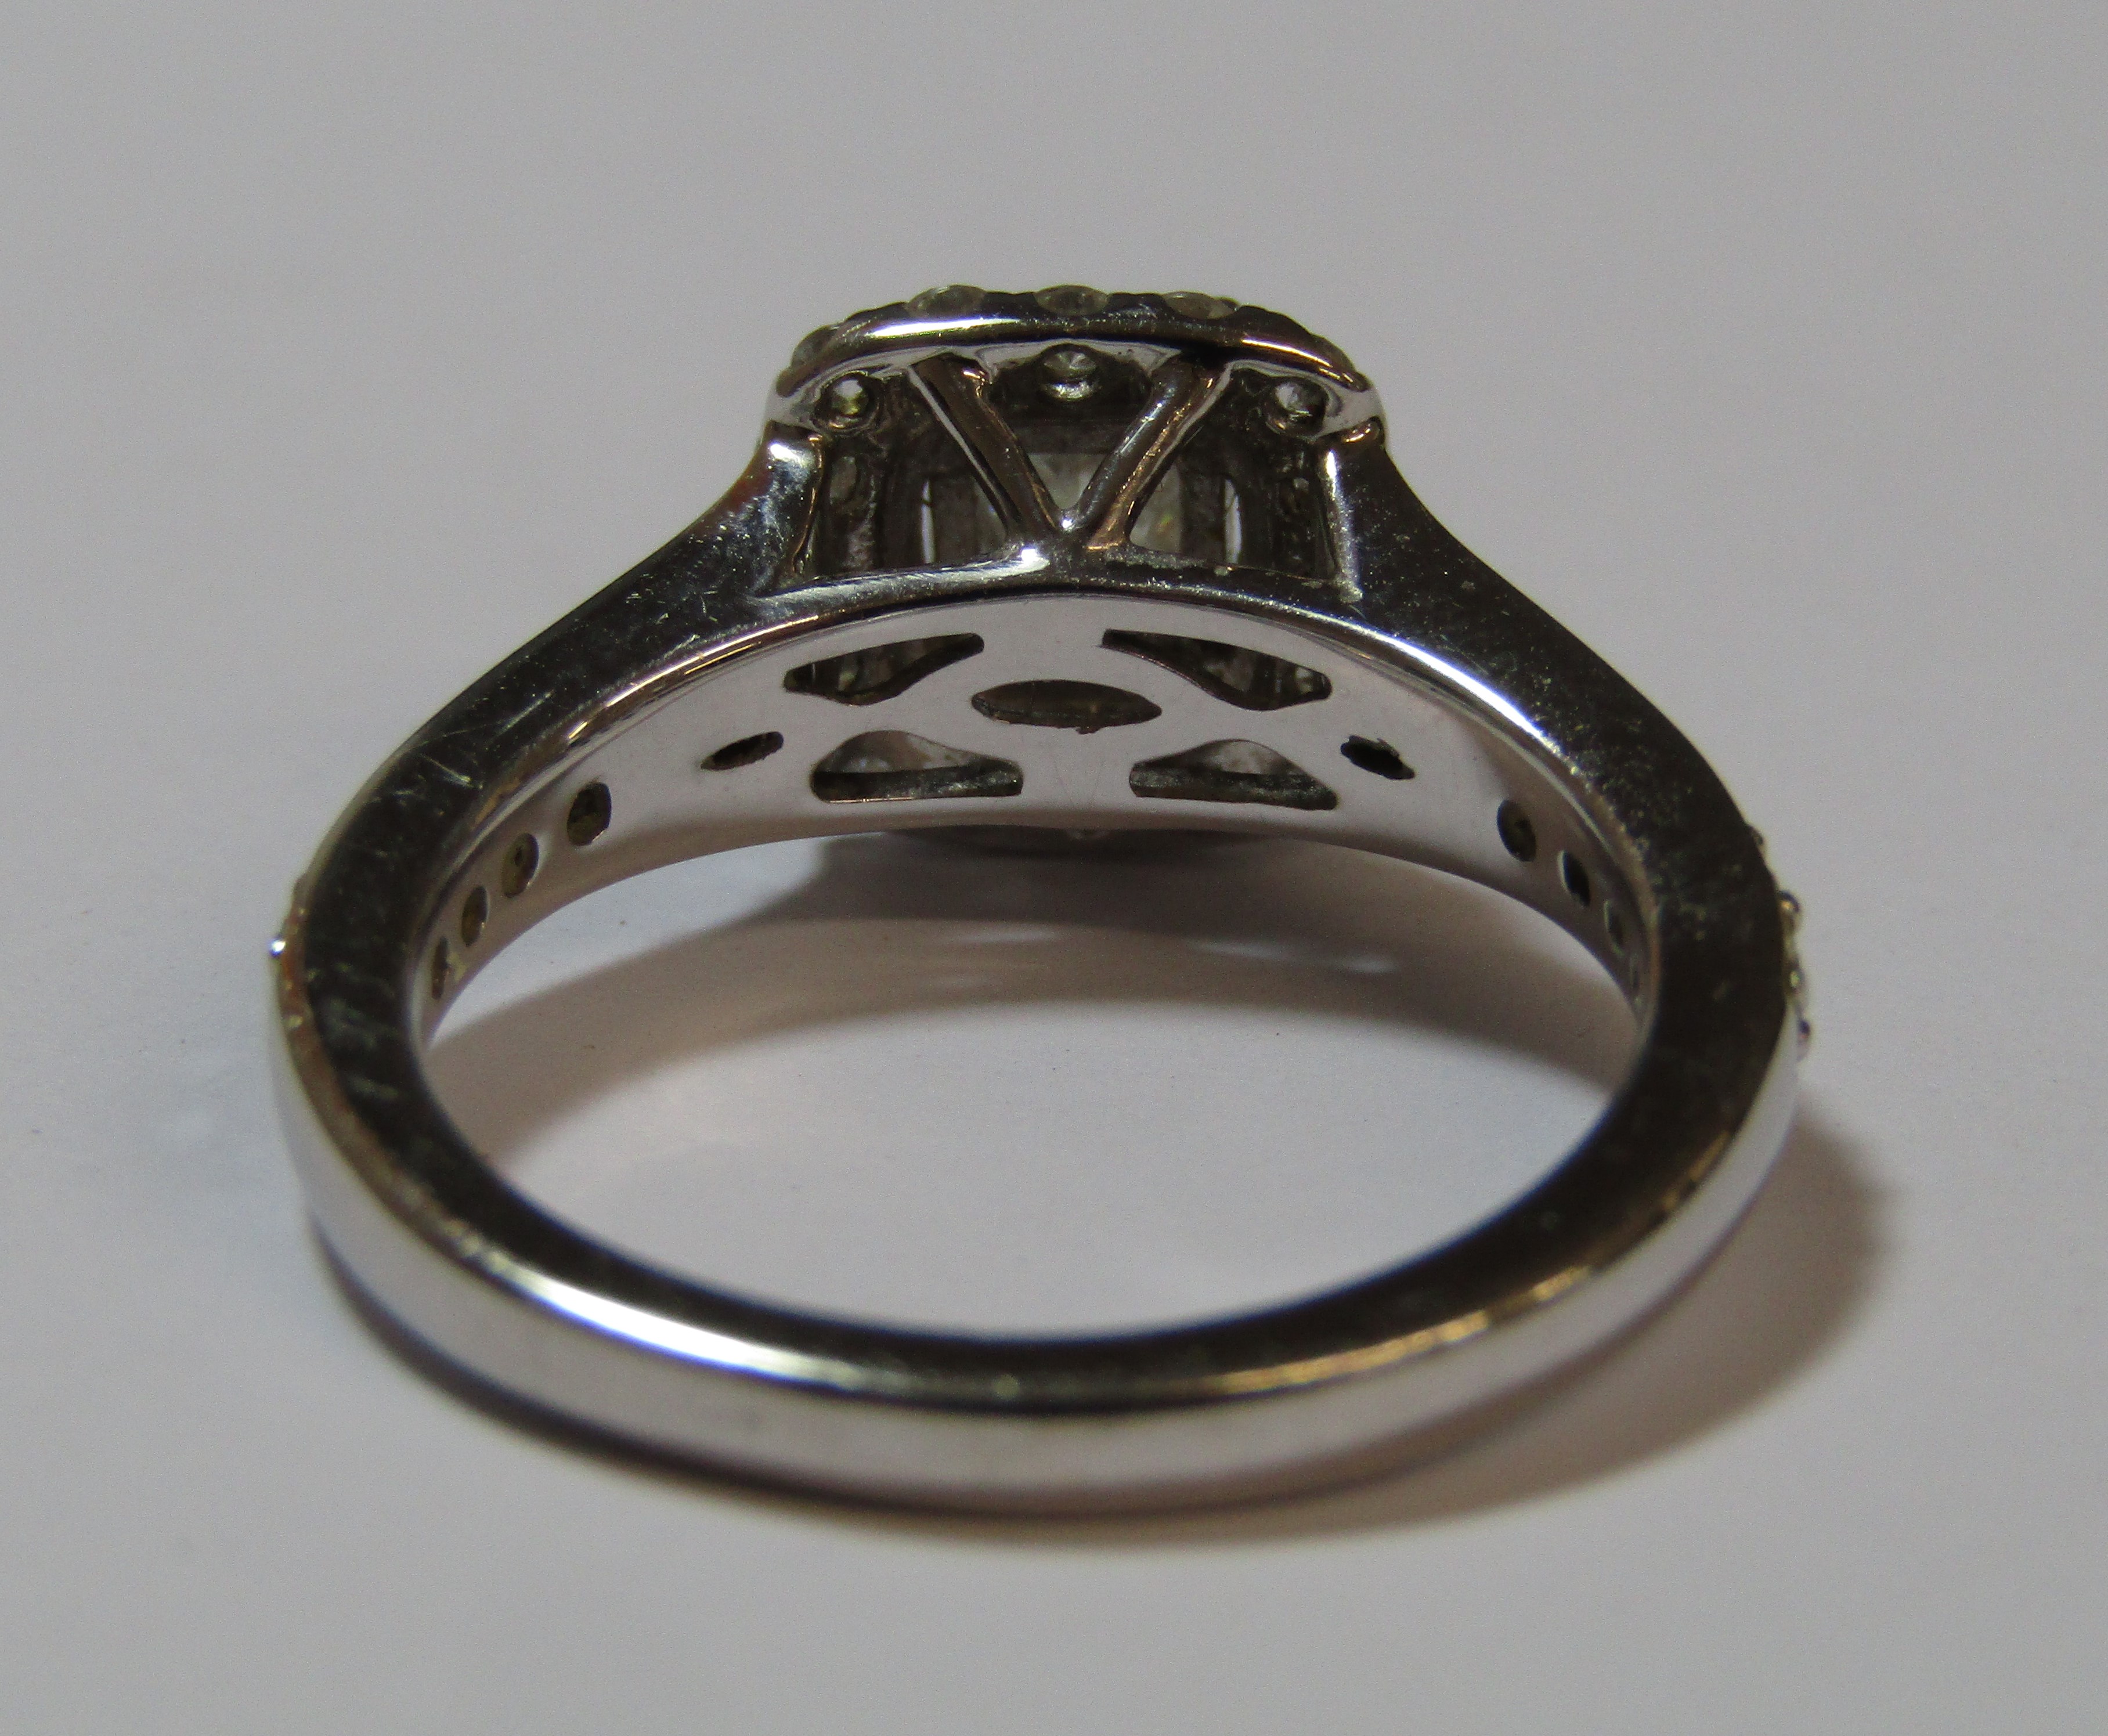 18ct white gold diamond ring with central princess cut 0.60ct diamond measuring 4.73 x 4.51 x 3. - Image 5 of 15